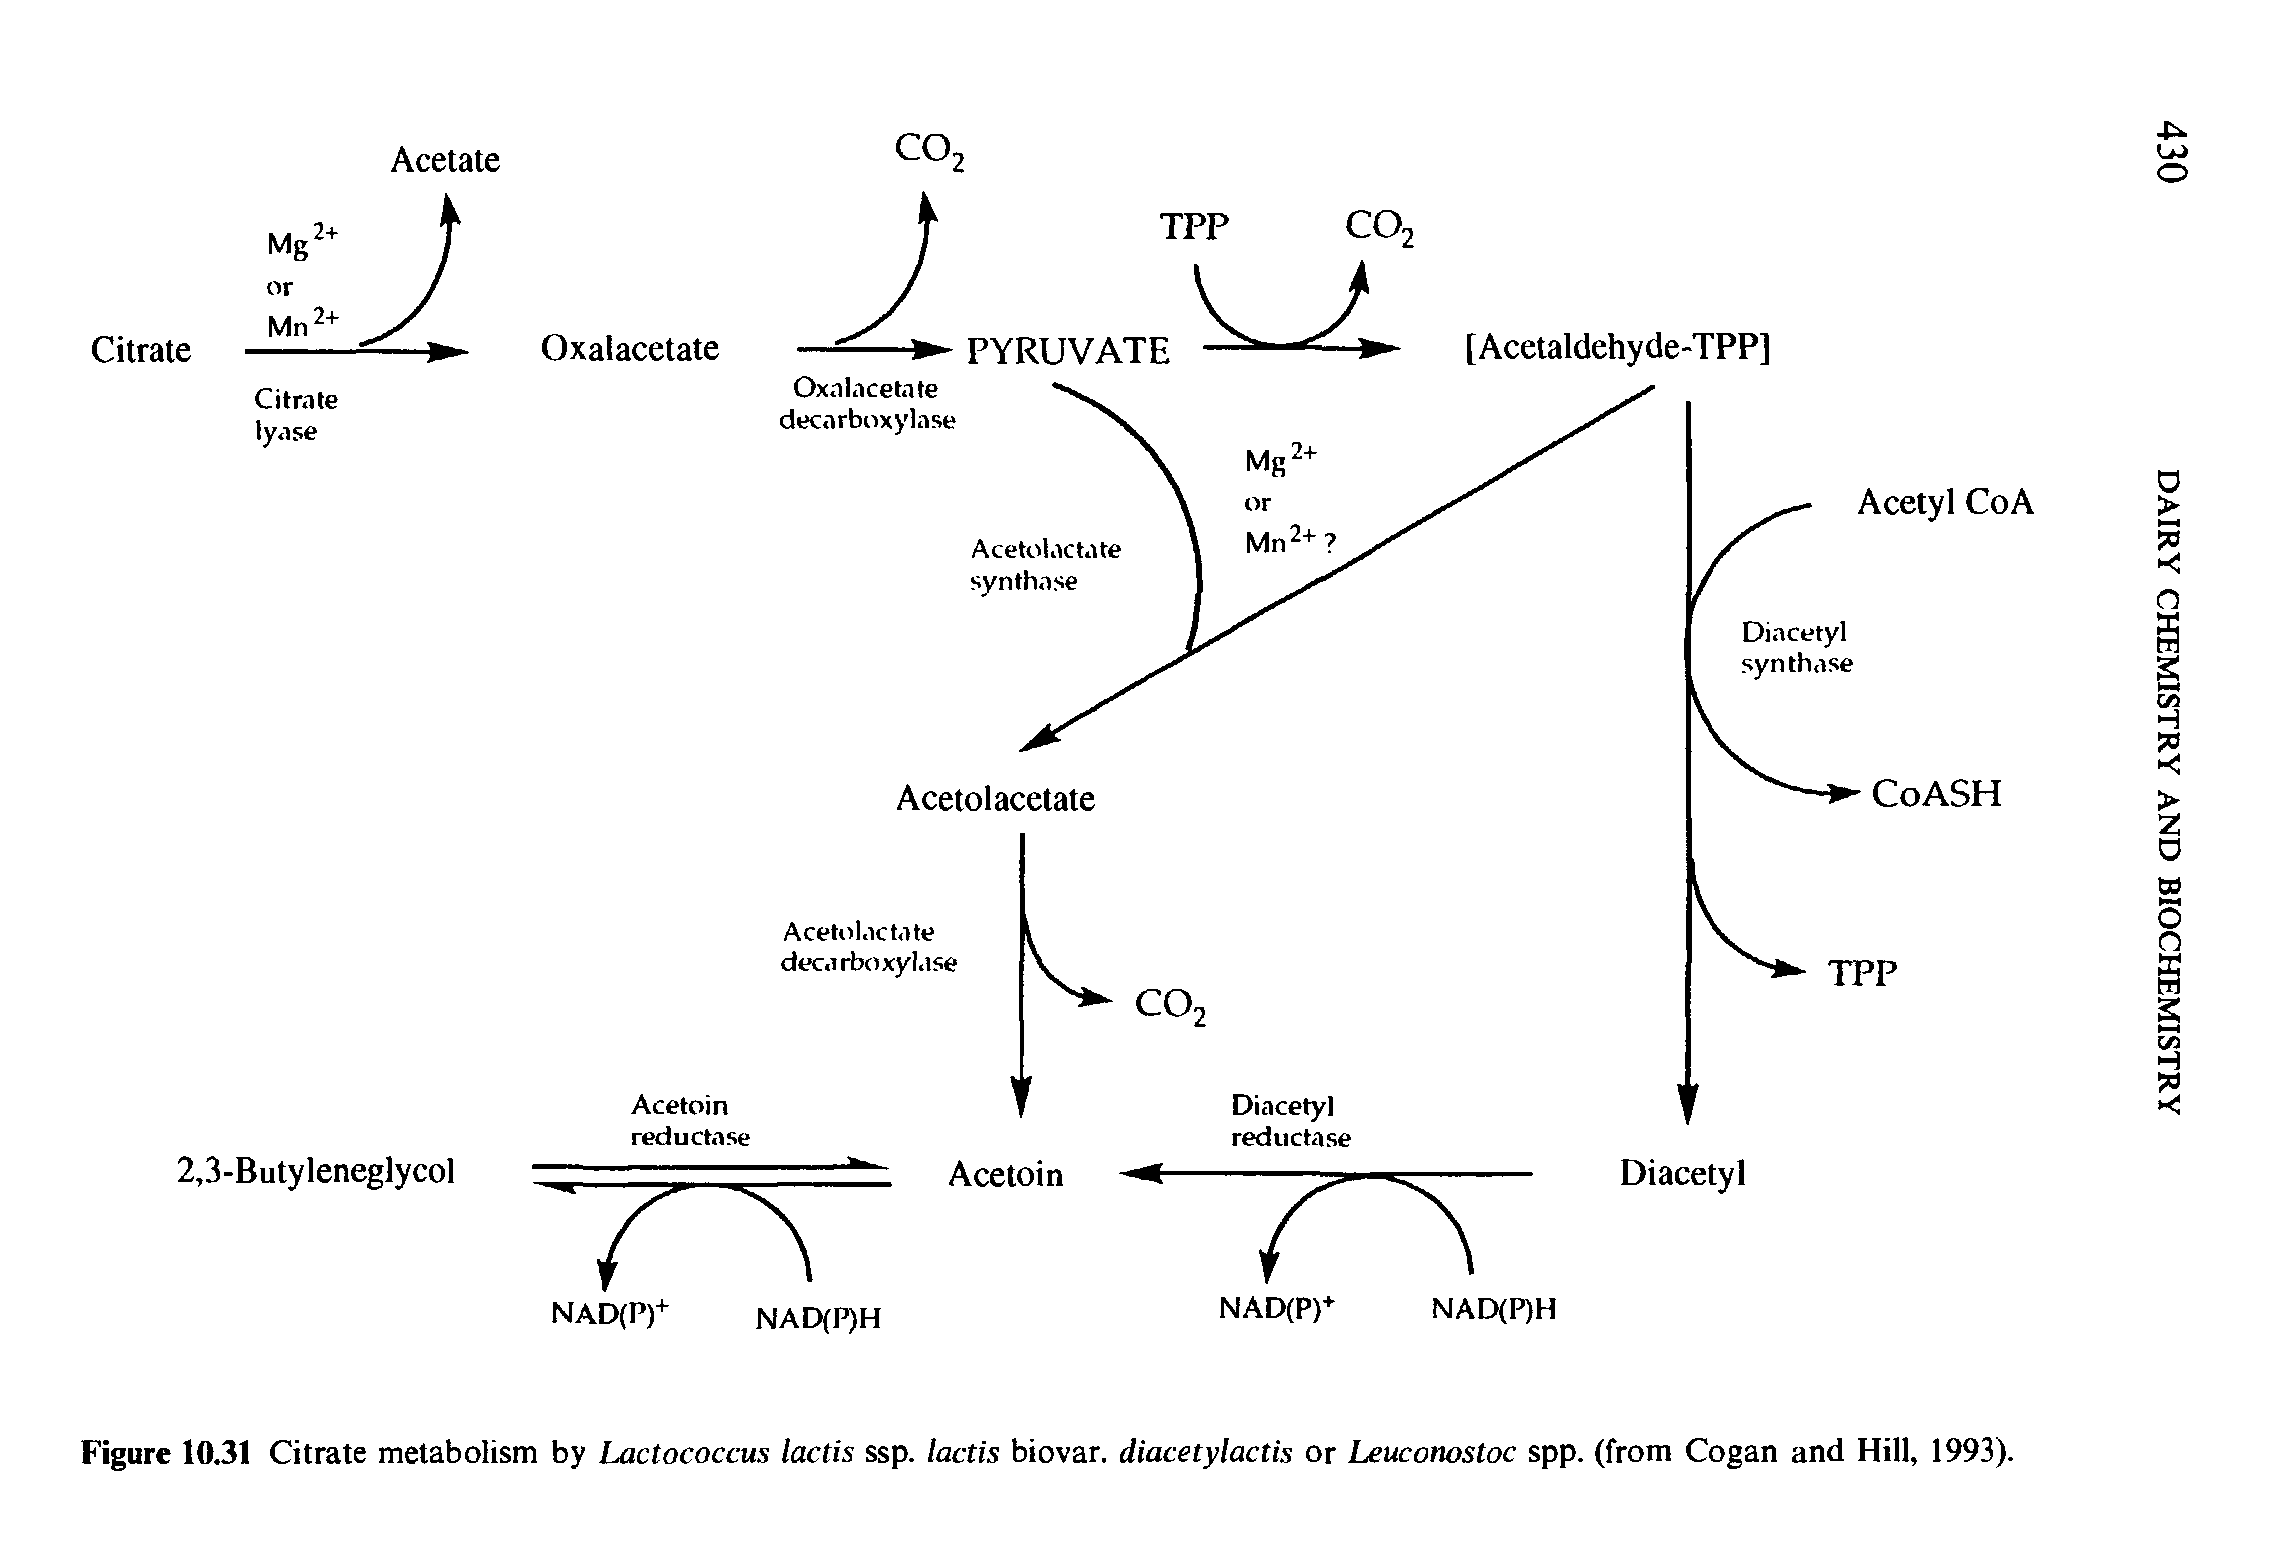 Figure 10.31 Citrate metabolism by Lactococcus lactis ssp. lactis biovar. diacetylactis or Leuconostoc spp. (from Cogan and Hill, 1993).